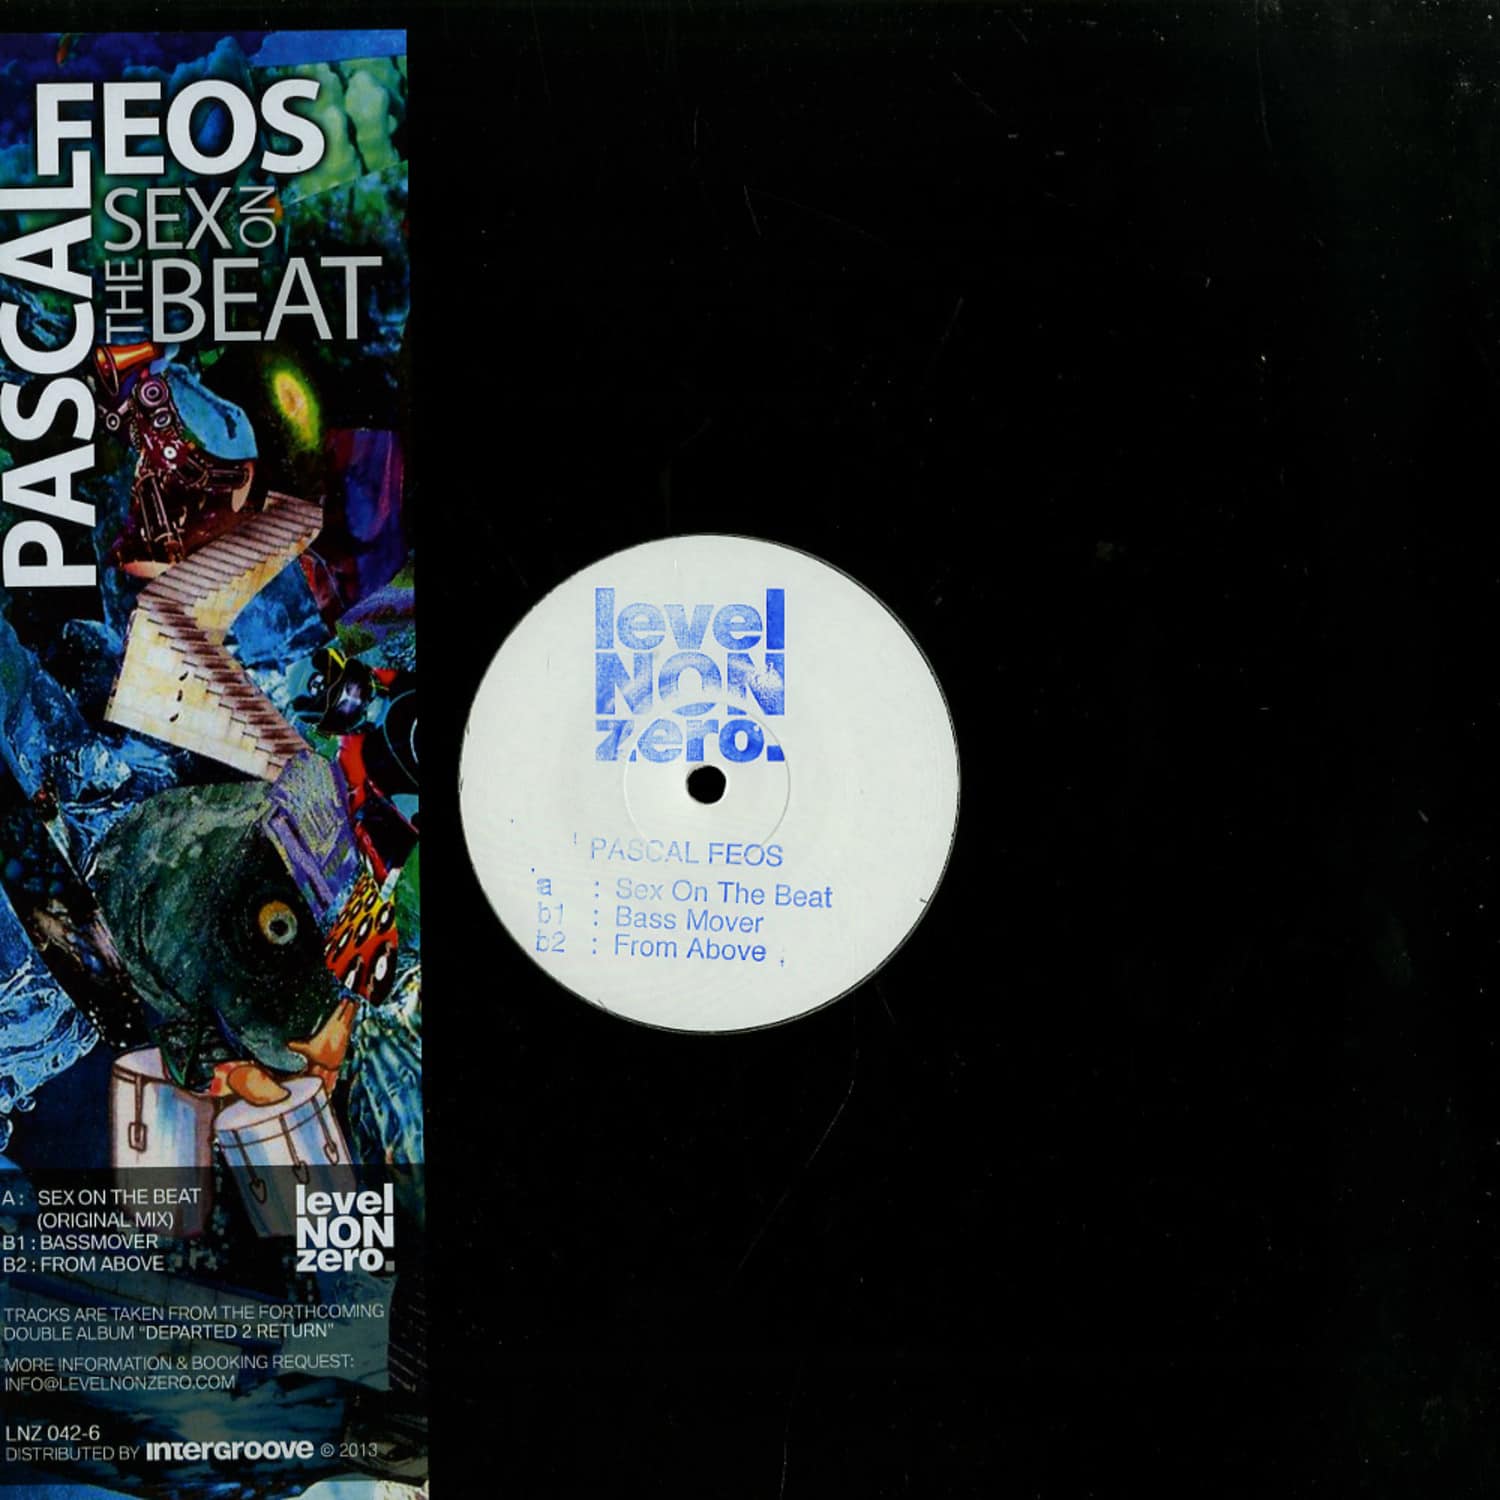 Pascal Feos - SEX ON THE BEAT